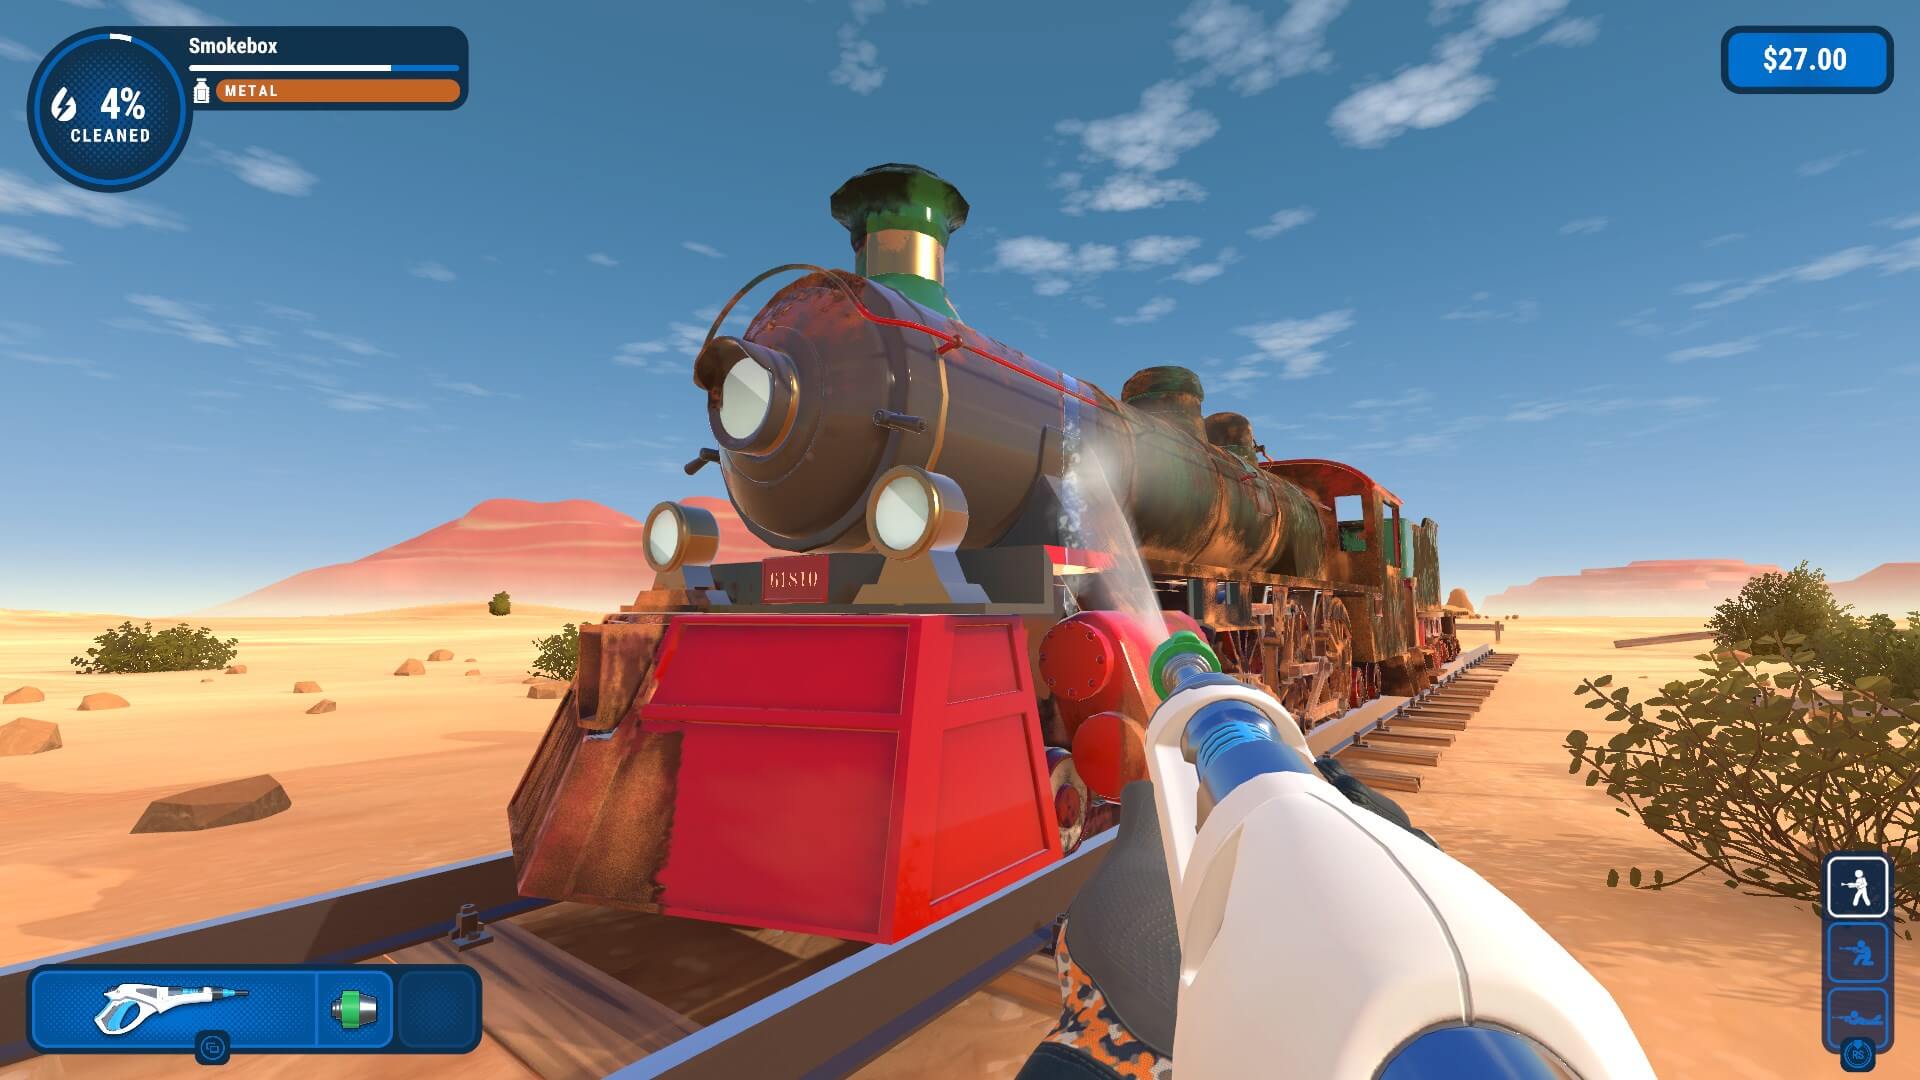 A gameplay screenshot of PowerWash Simulator, showcasing the player cleaning the front of a red steam train.